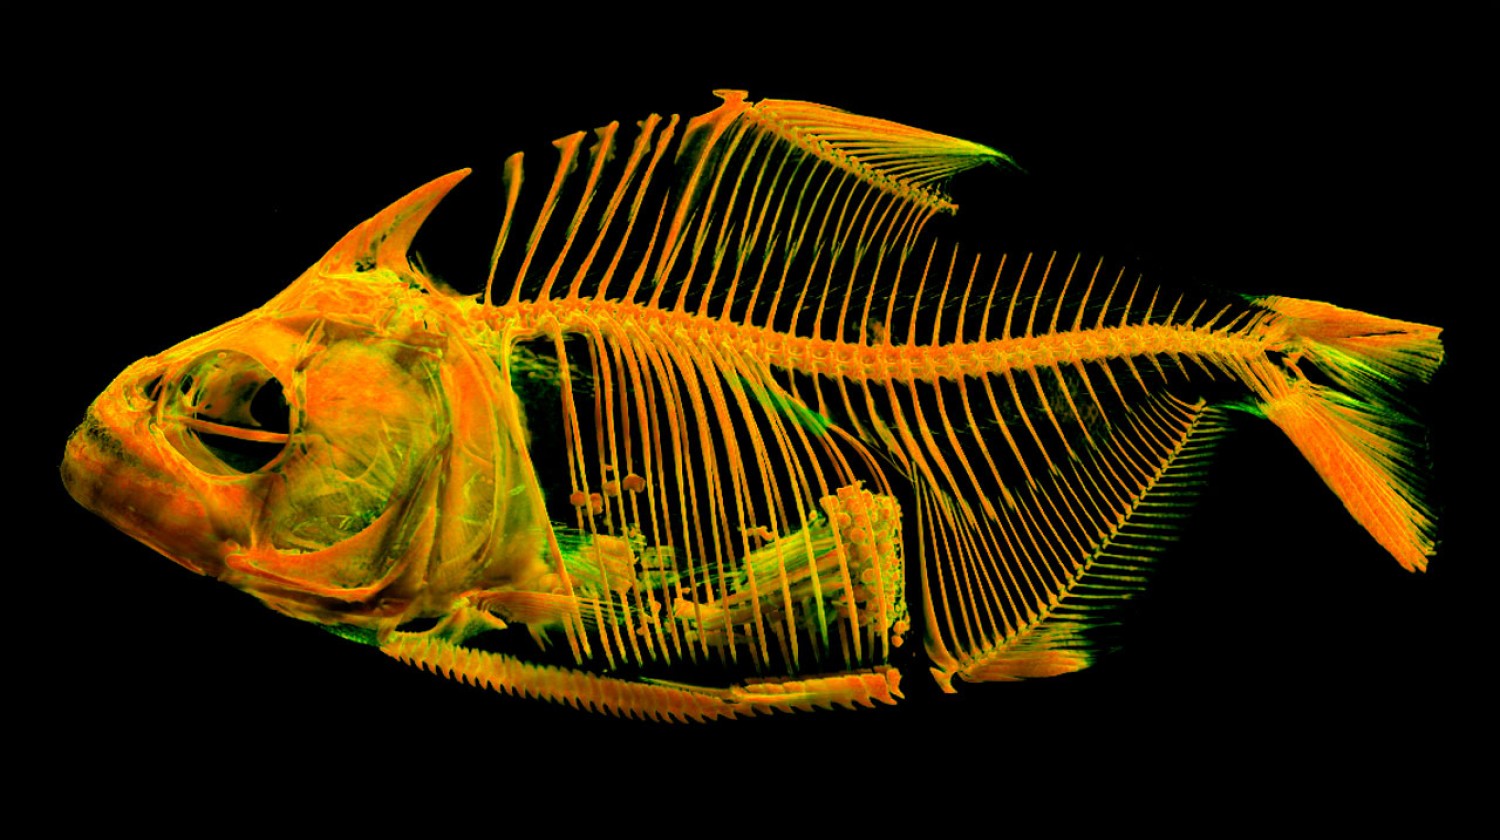 Lateral view of Piranha